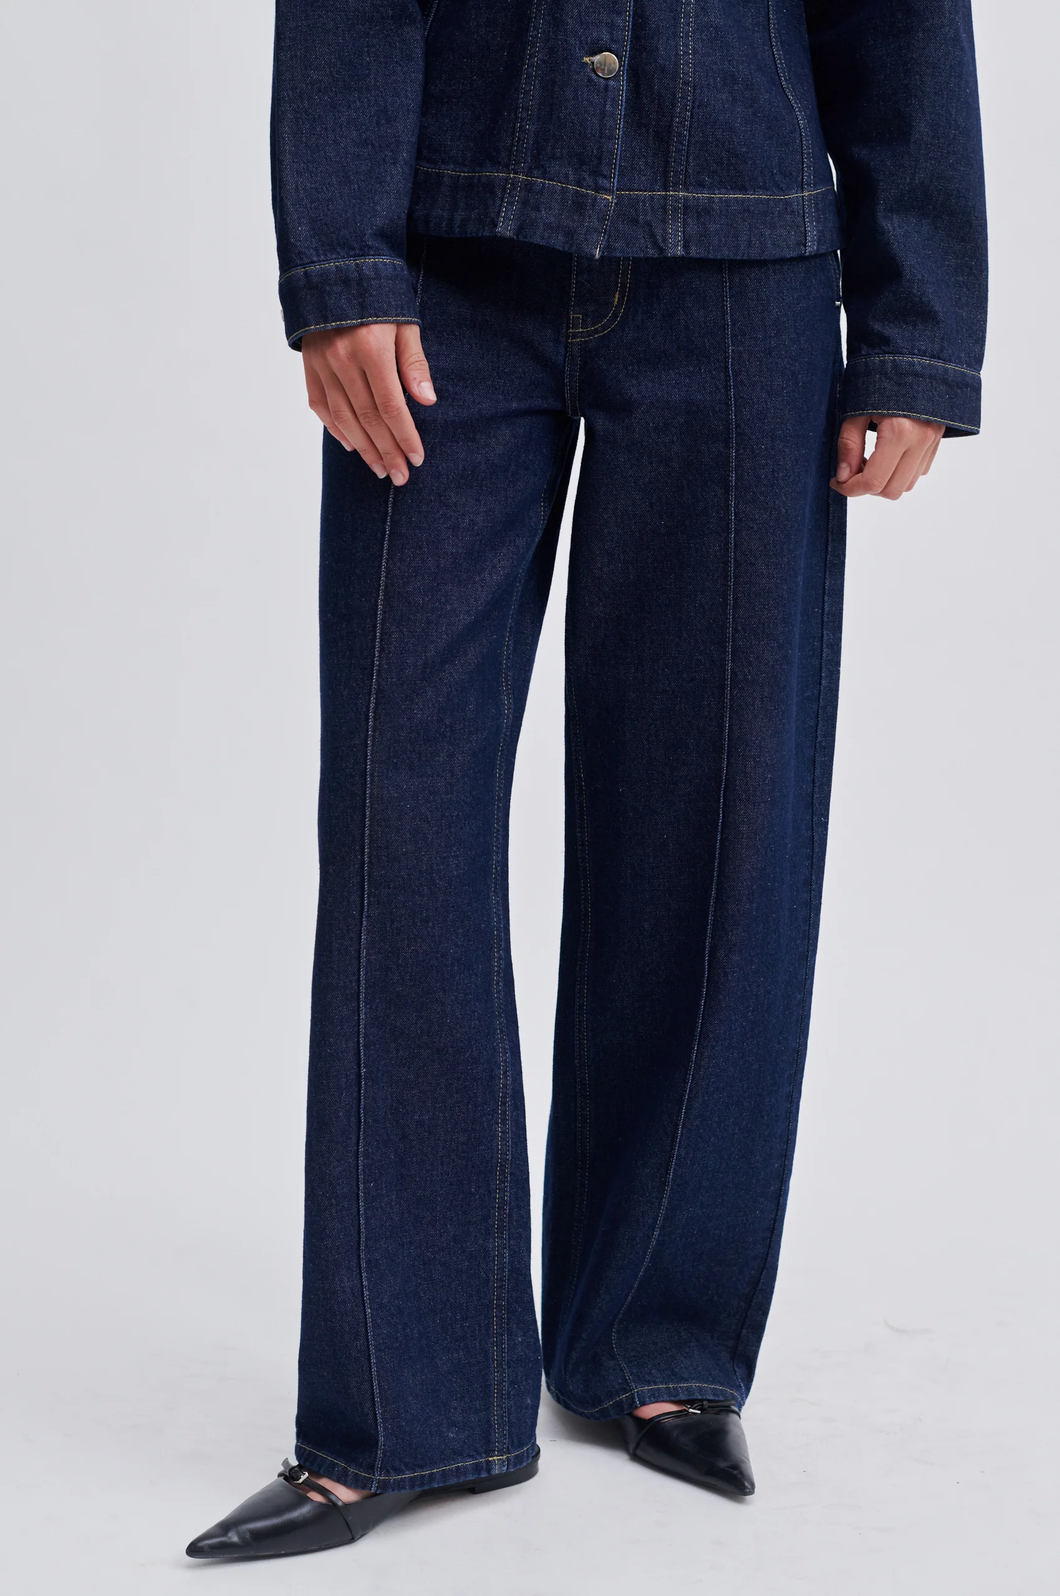 Second Female - Colombus Trousers - Dark Blue